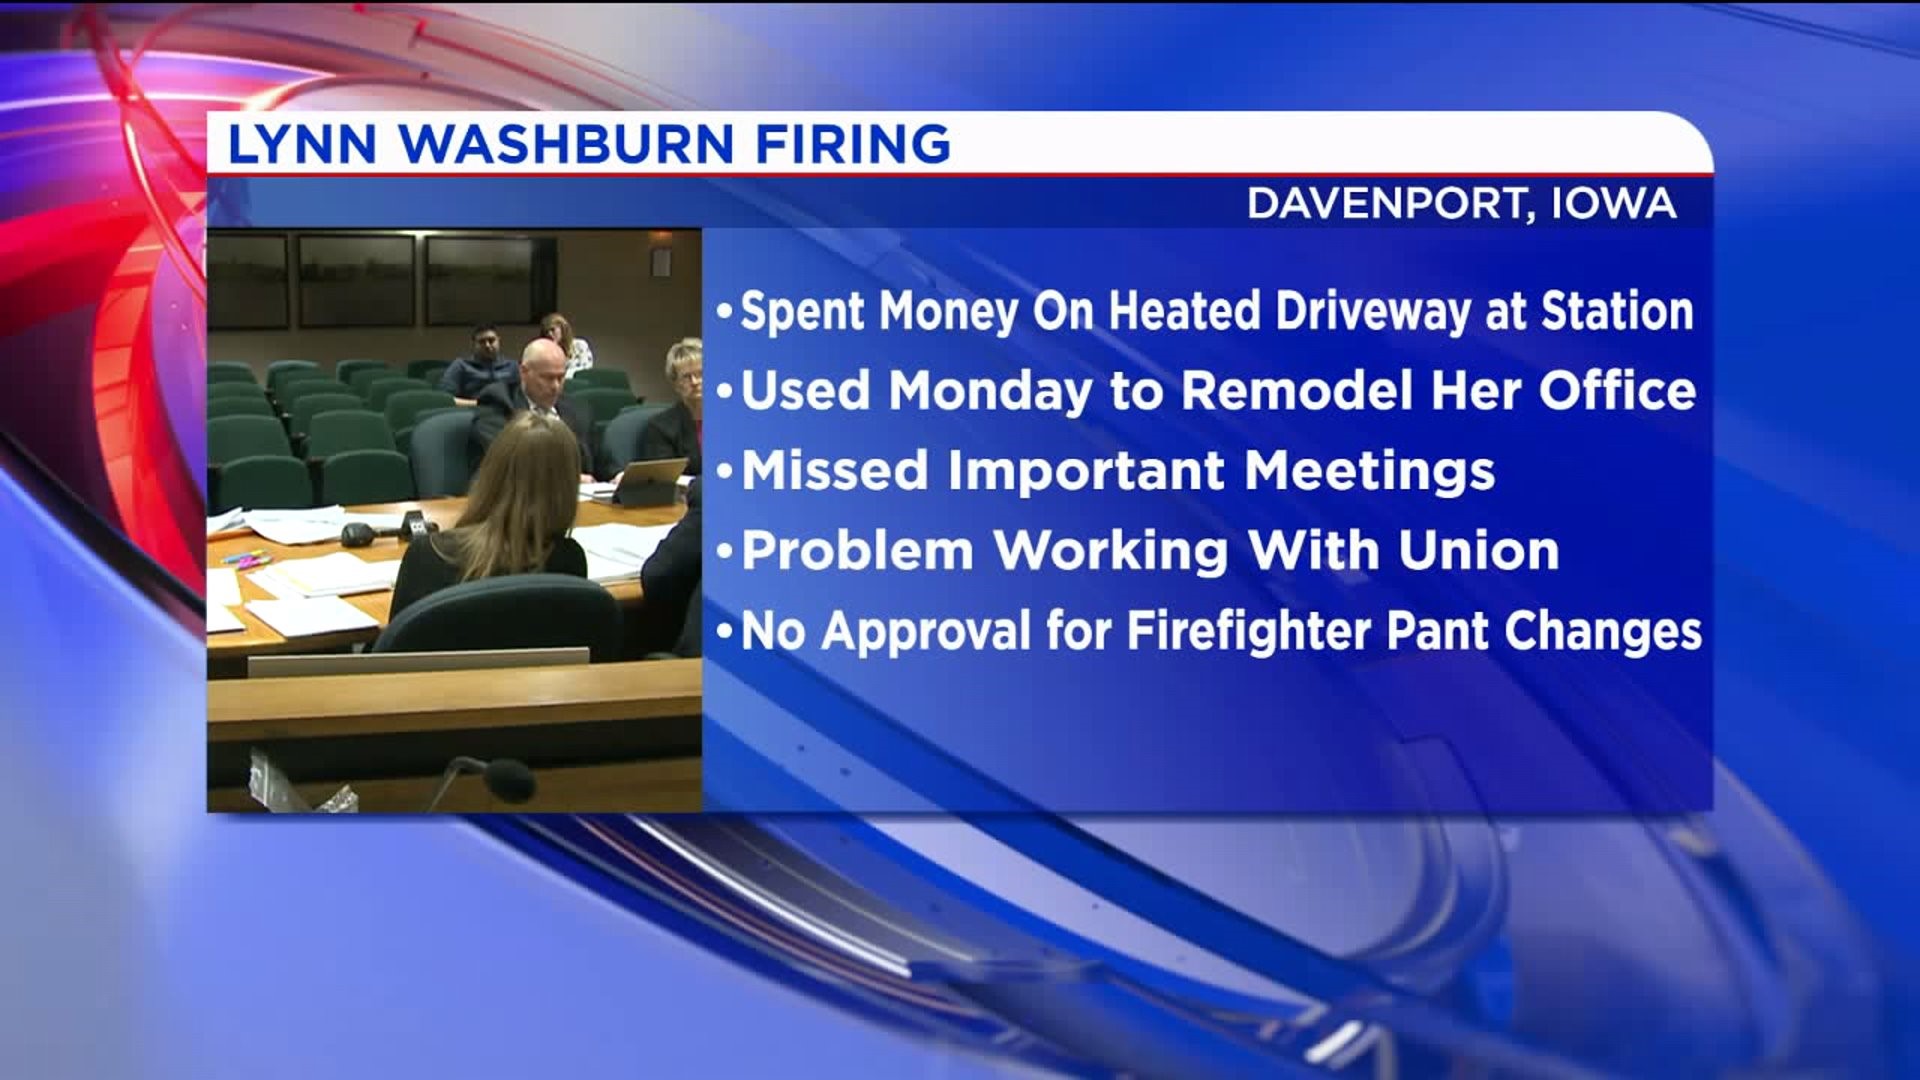 Why Lynn Washburn was Fired, according to the city